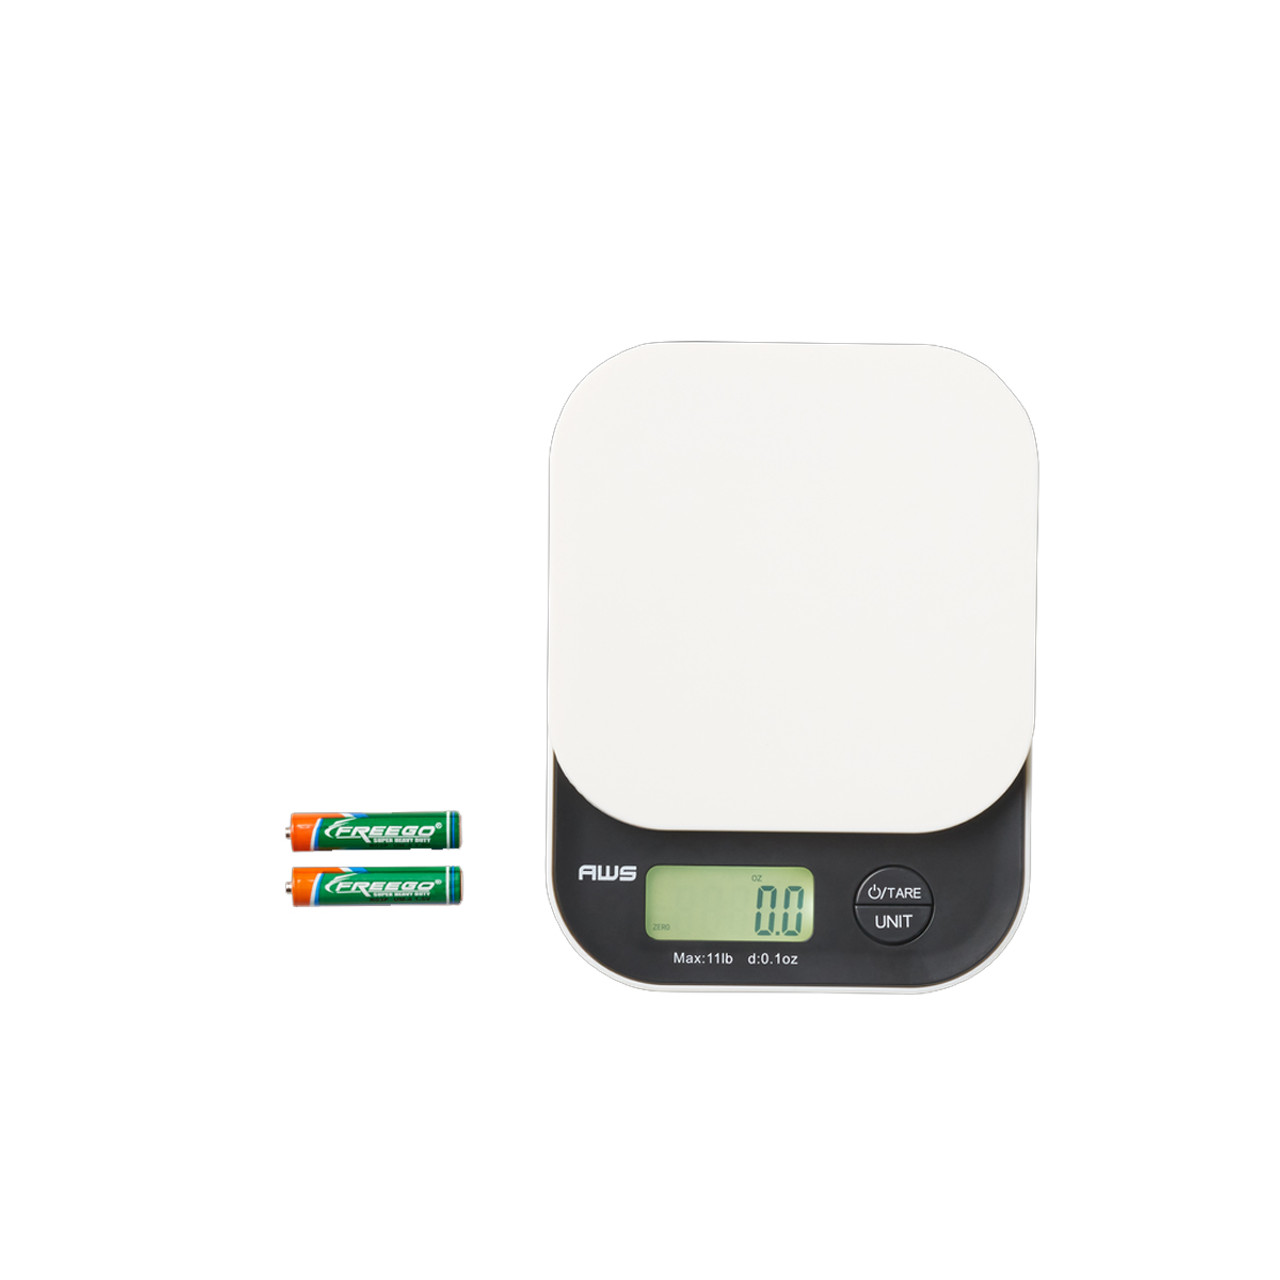 Where to buy a digital kitchen scale:  has 5 best-sellers - Reviewed